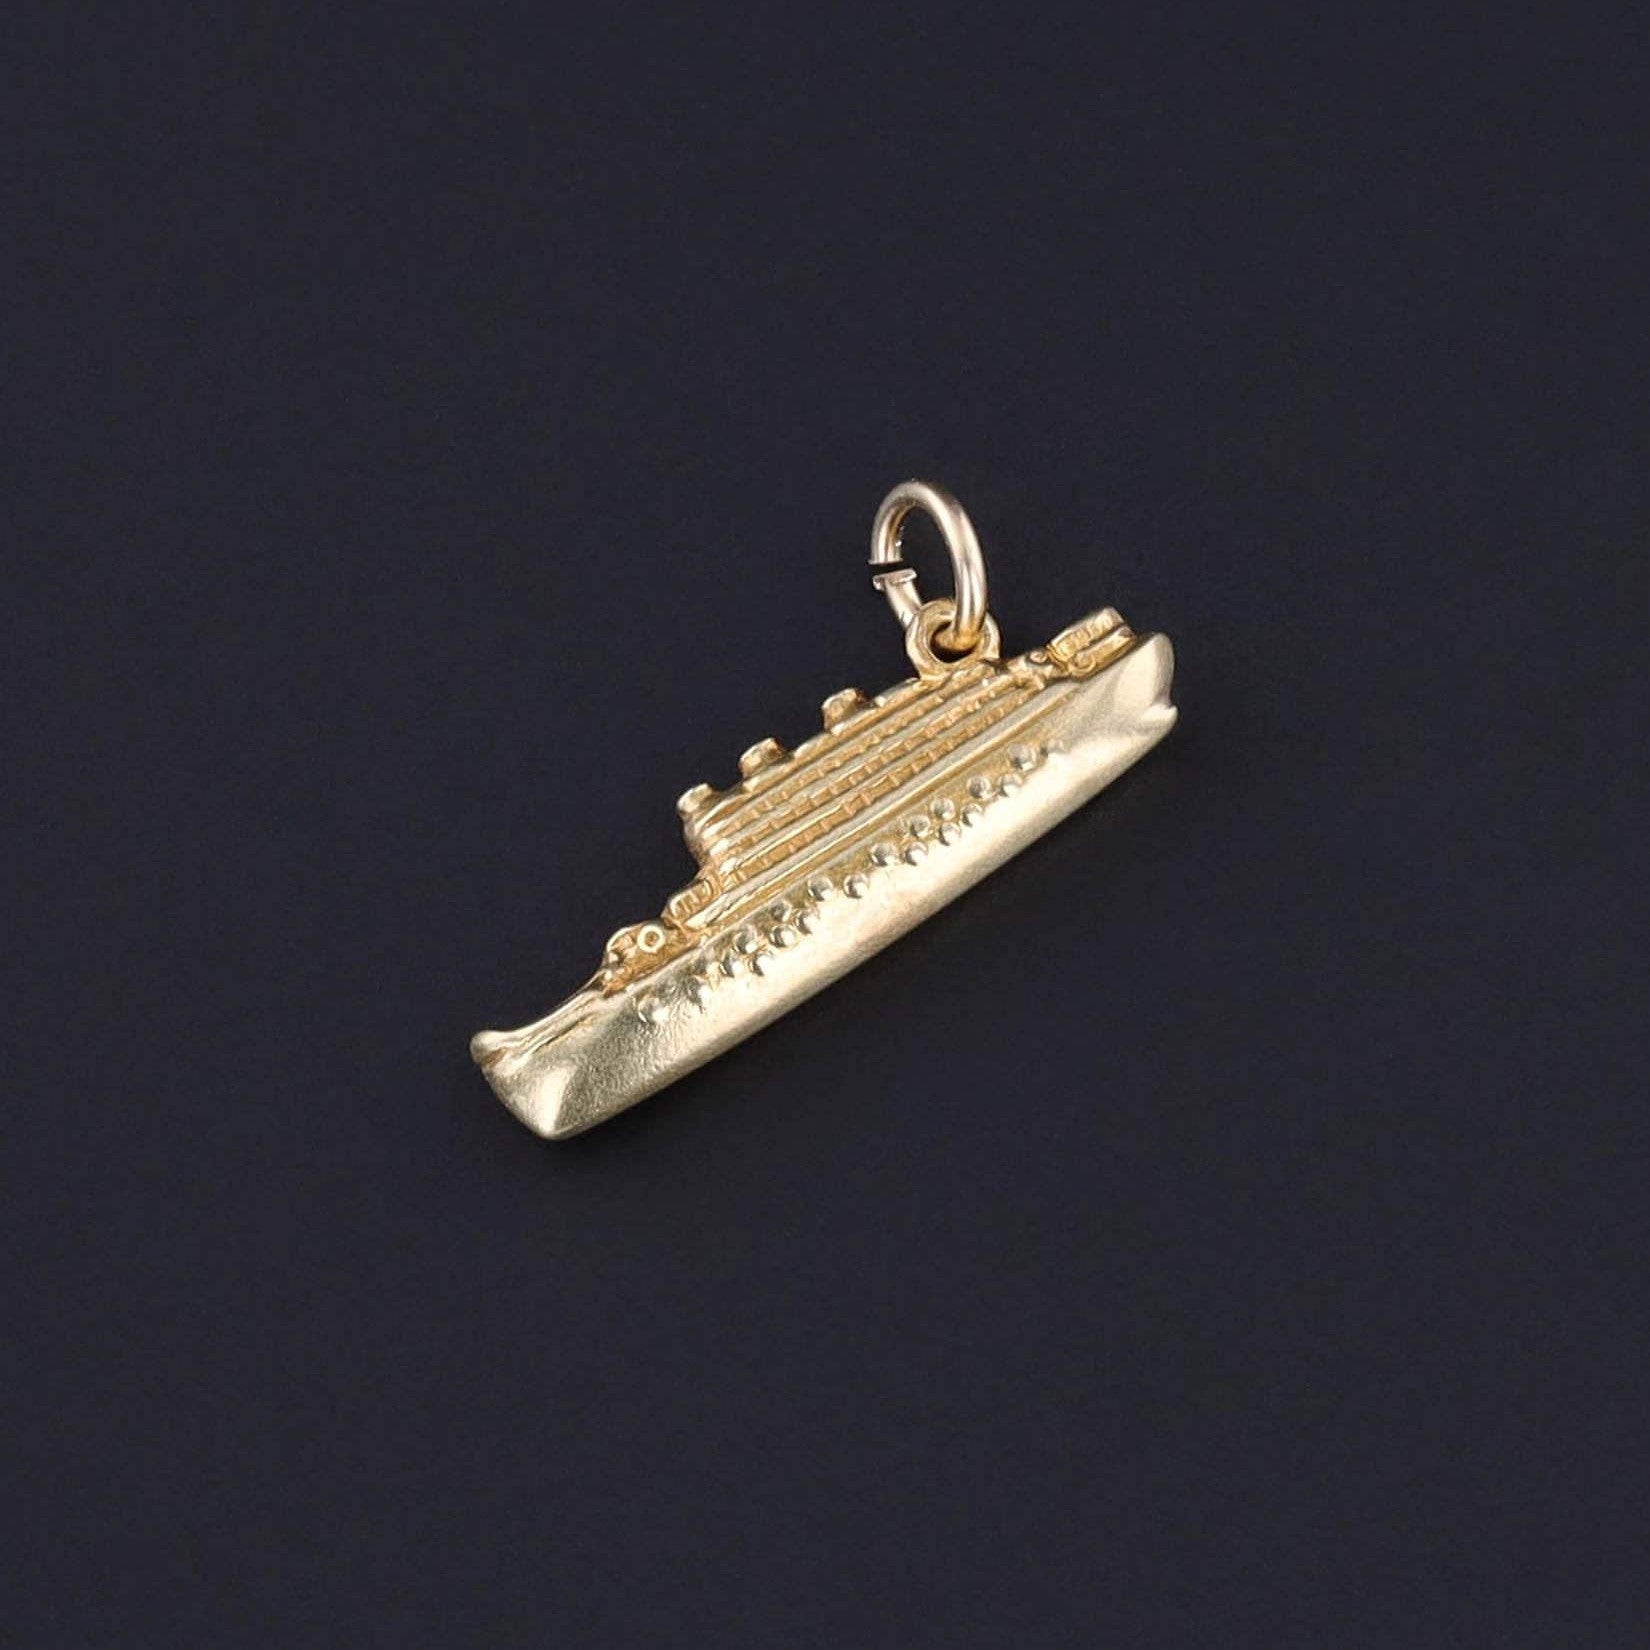 Vintage Cruise Ship Charm of 14k Gold